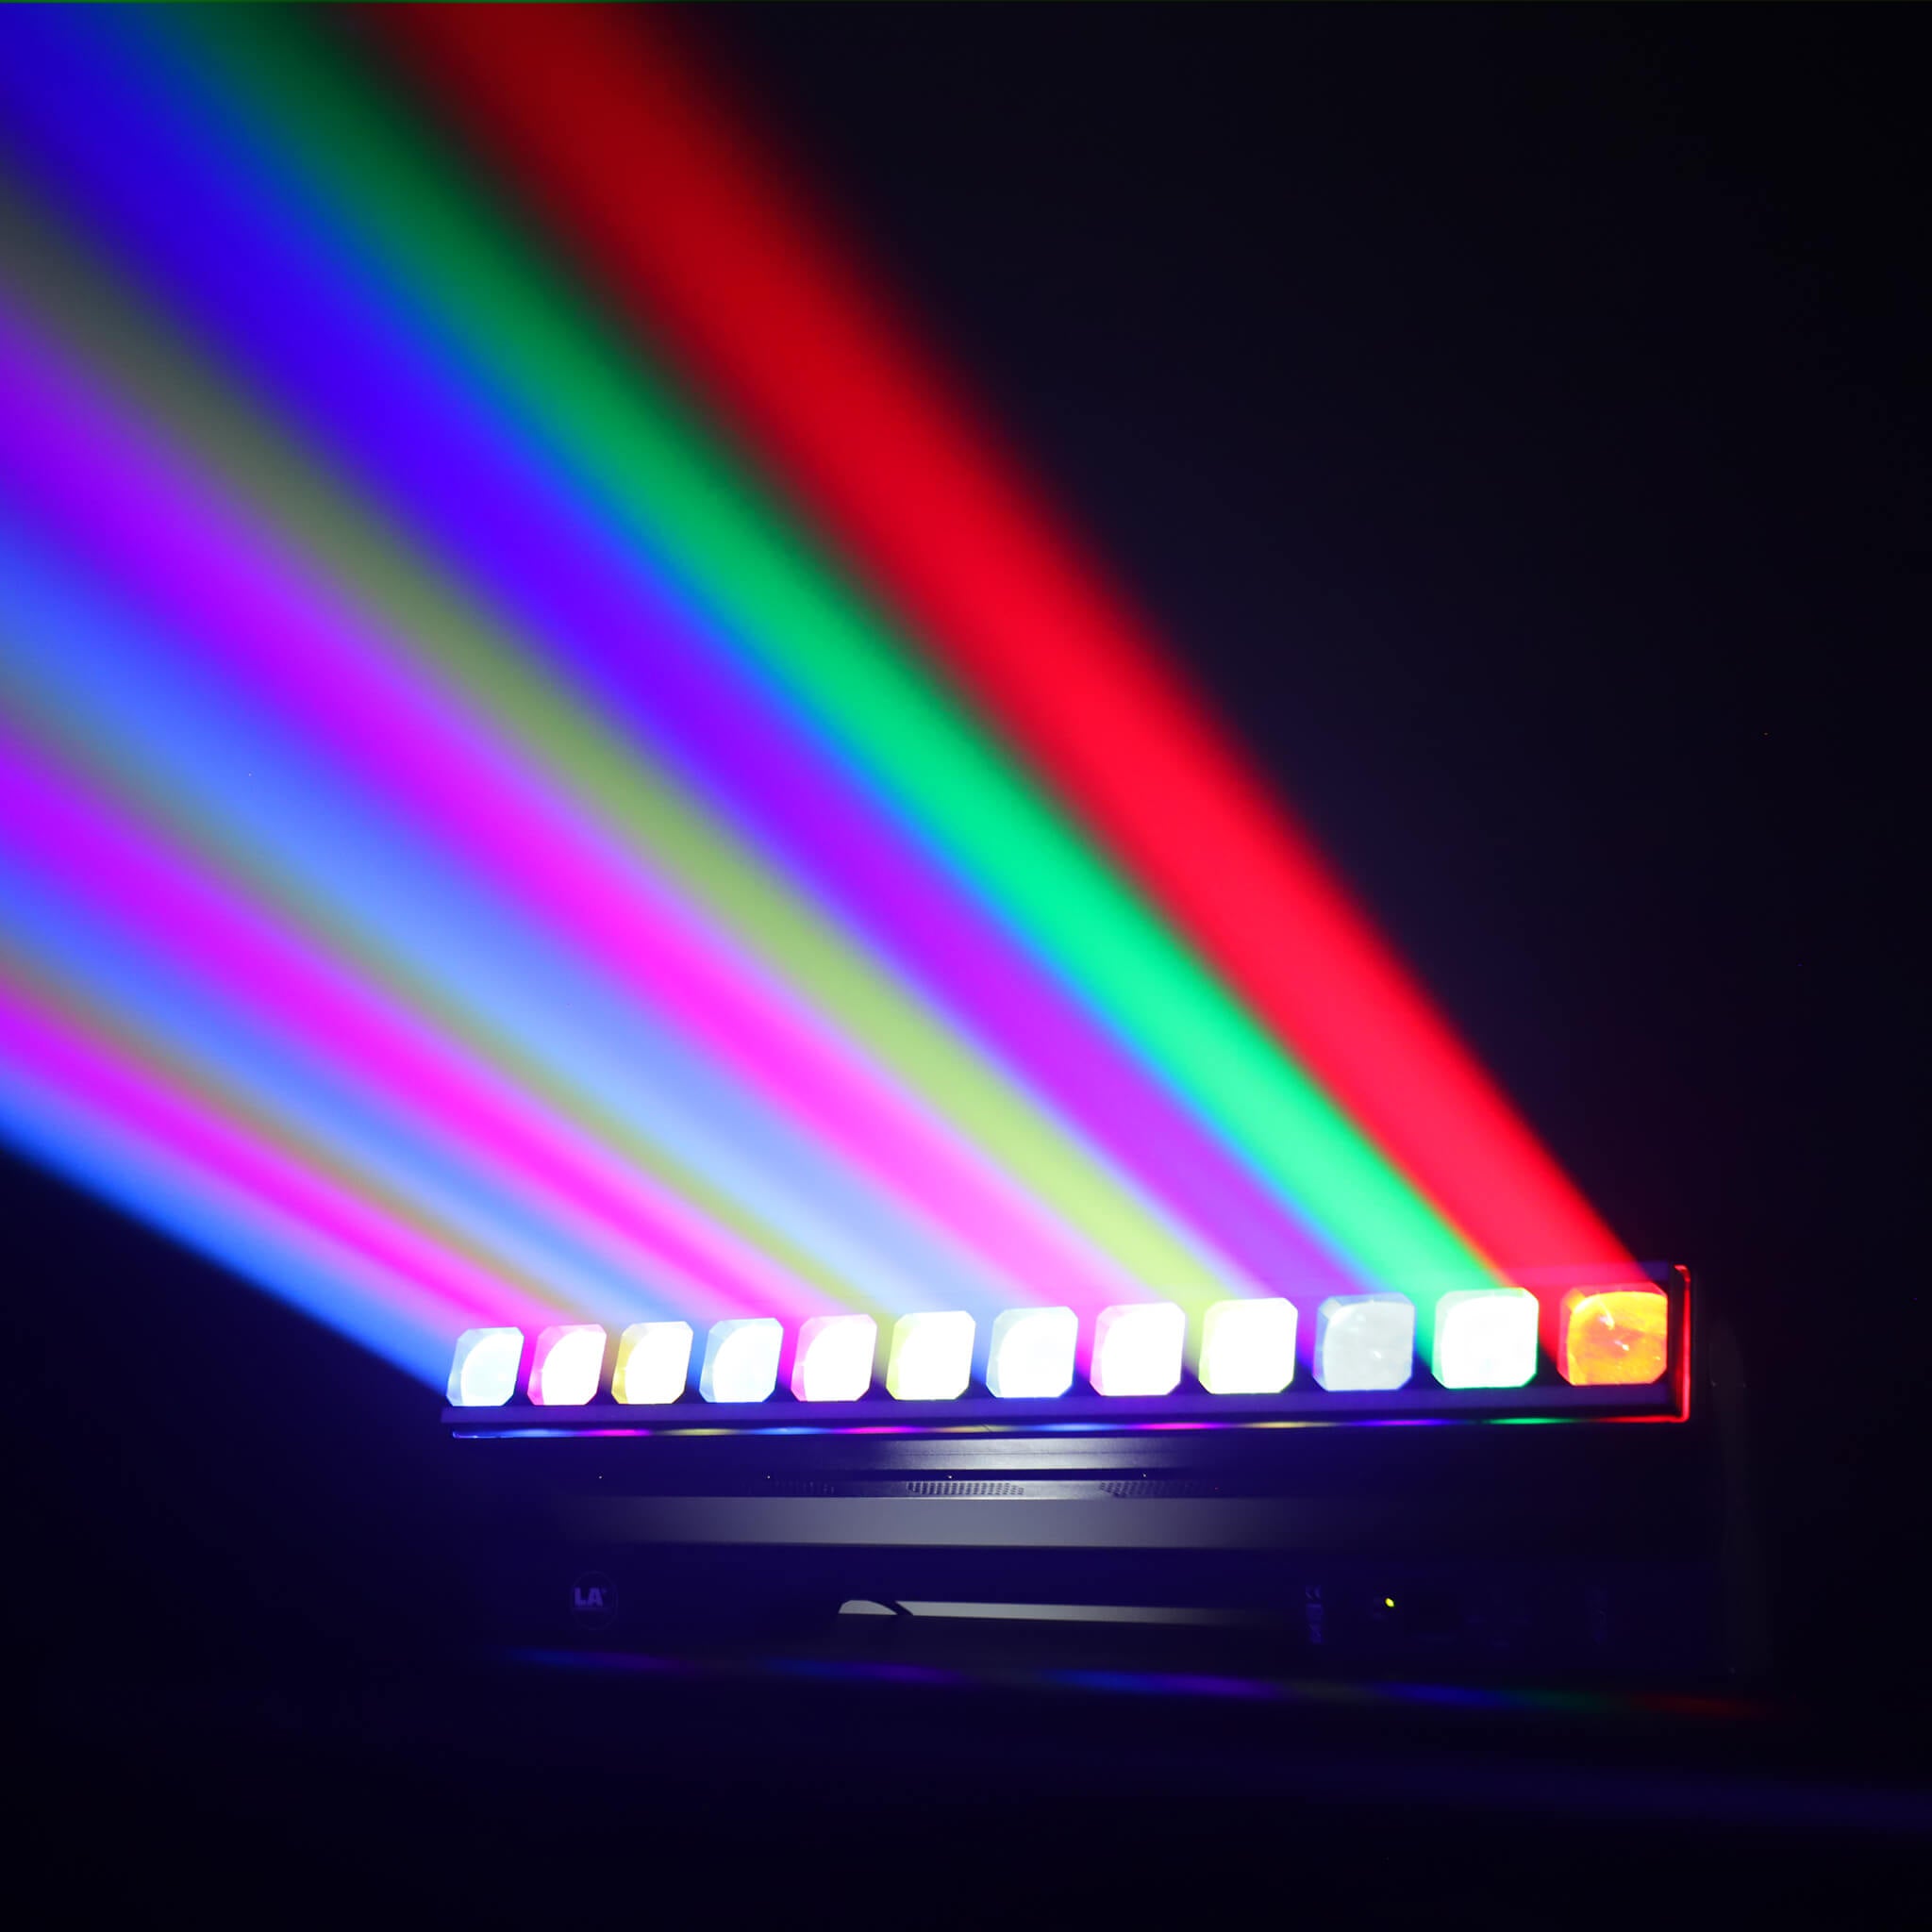 12x40W LED Moving Beambar With Zoom